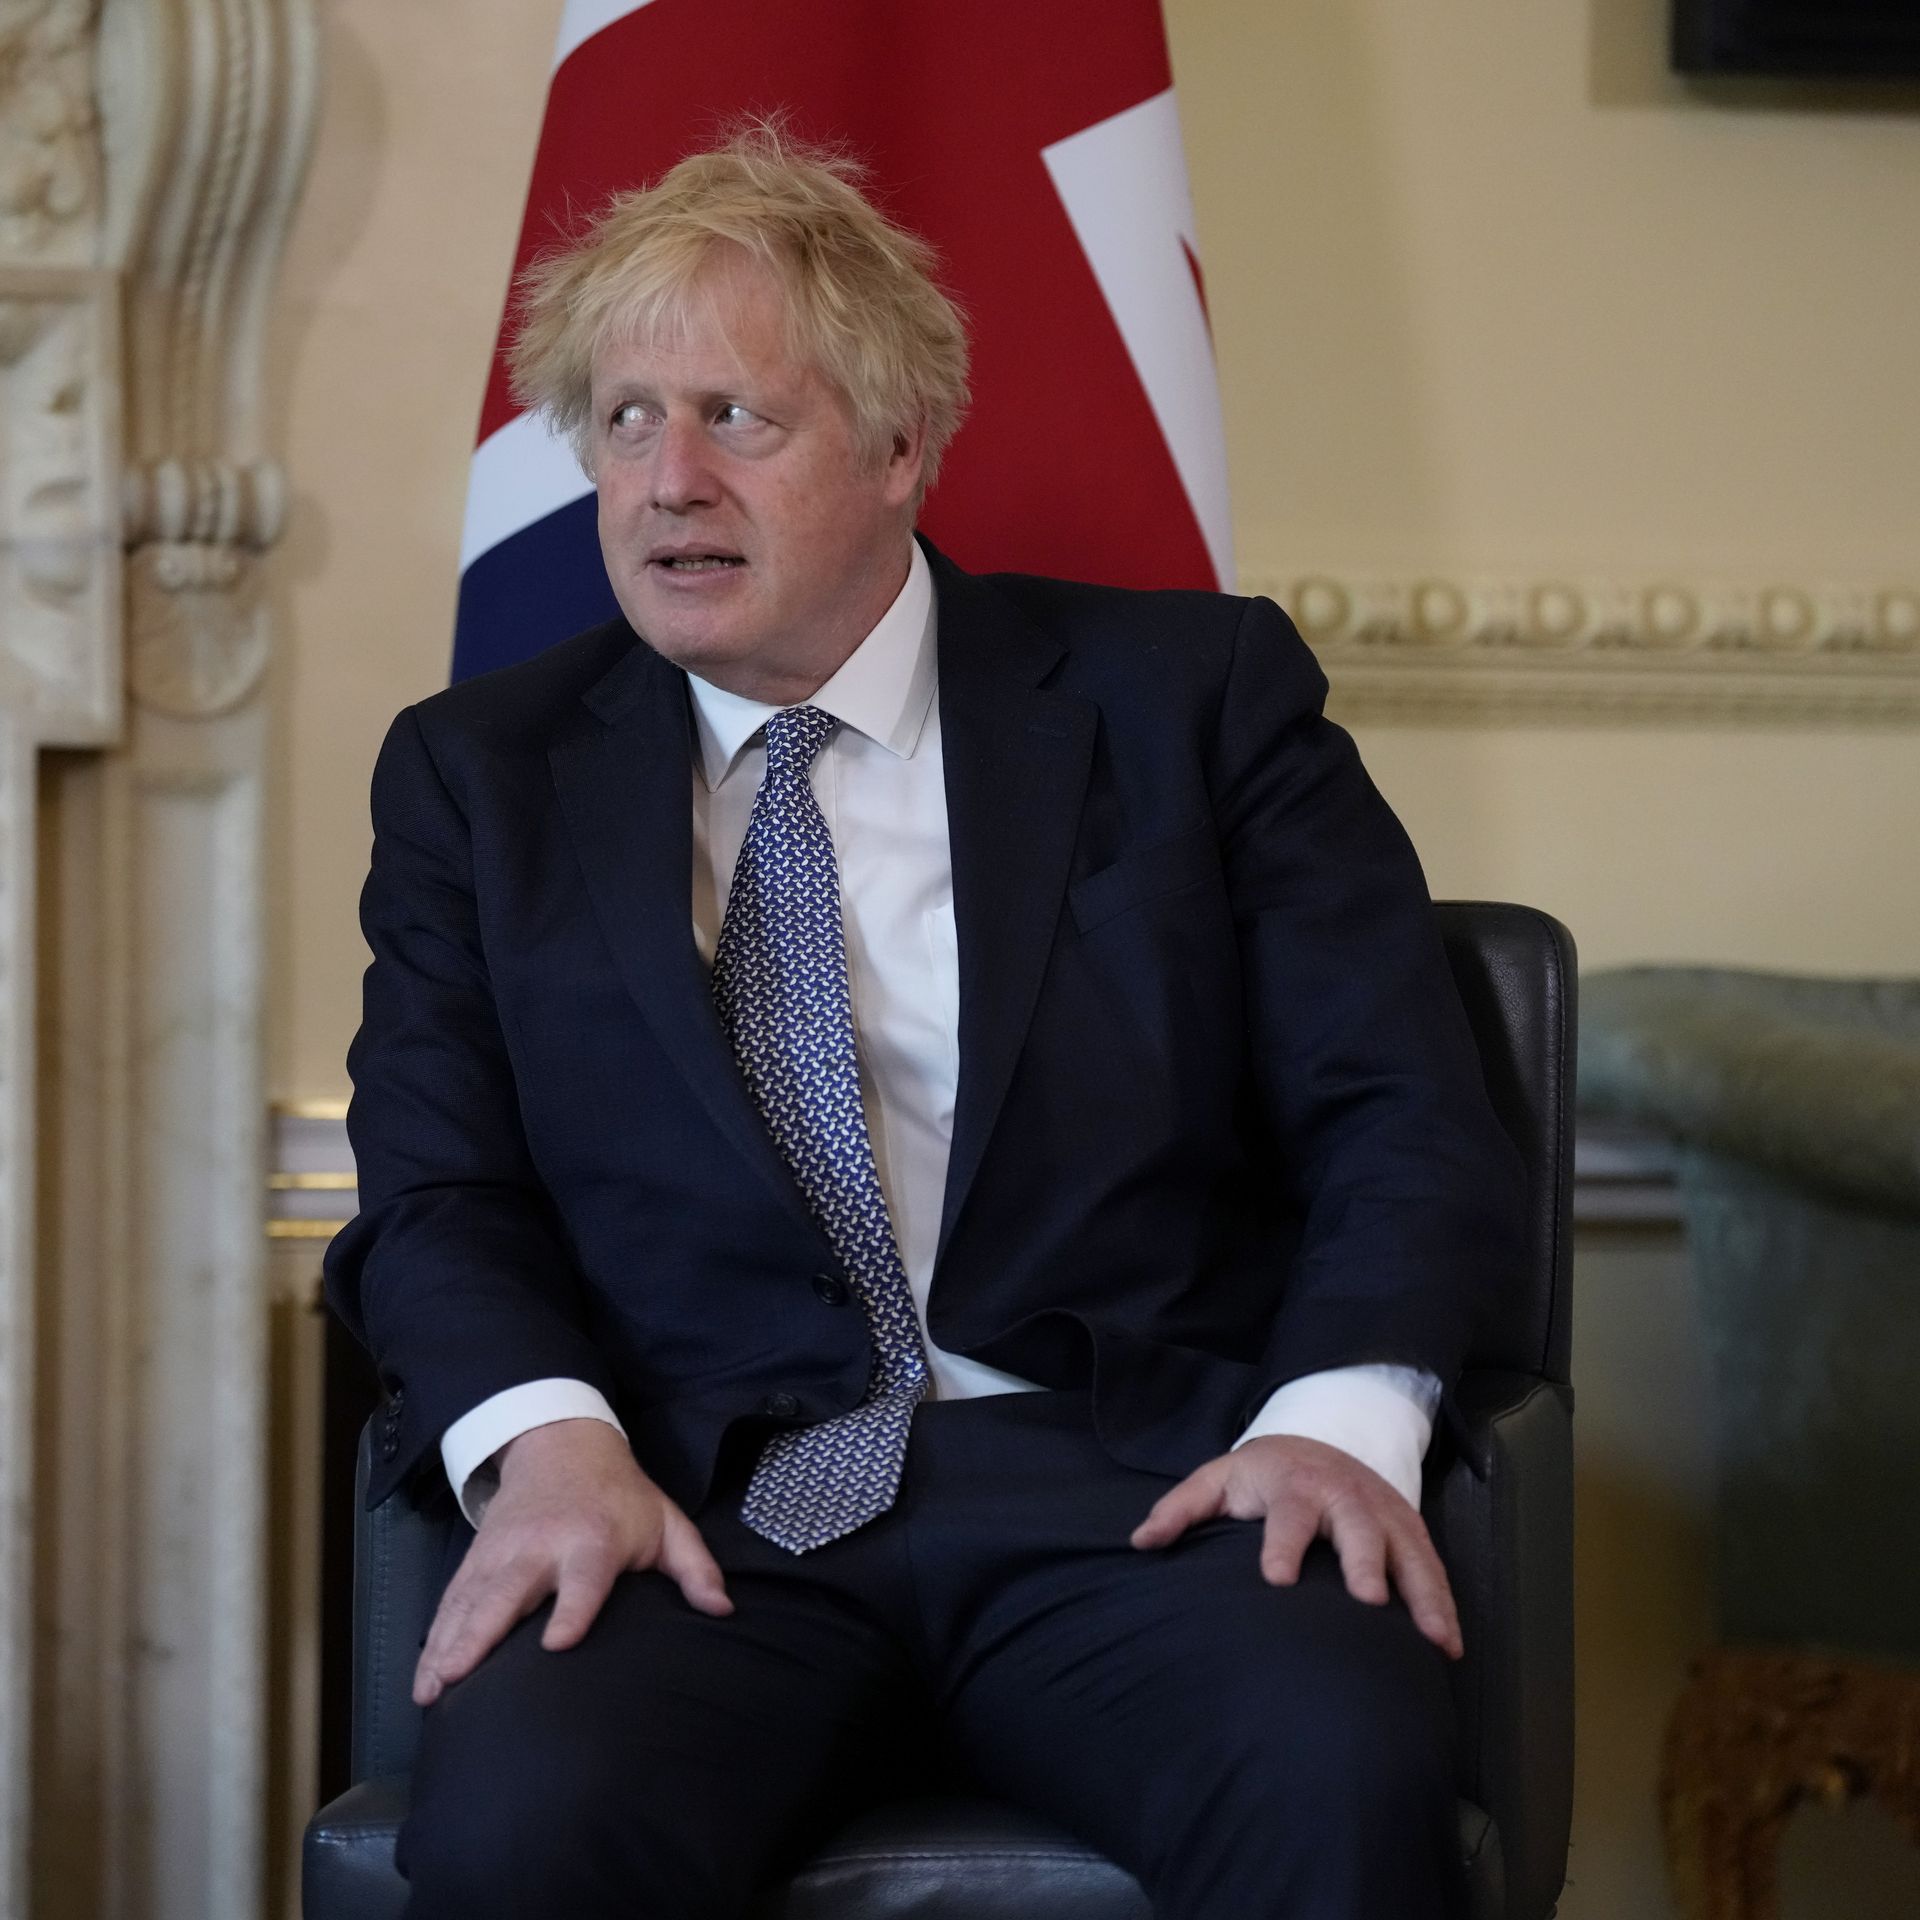  British Prime Minister Boris Johnson listens during the meeting with the Emir of Qatar Sheikh Tamim bin Hamad Al Thani inside 10 Downing Street on May 24, 2022 in London, England